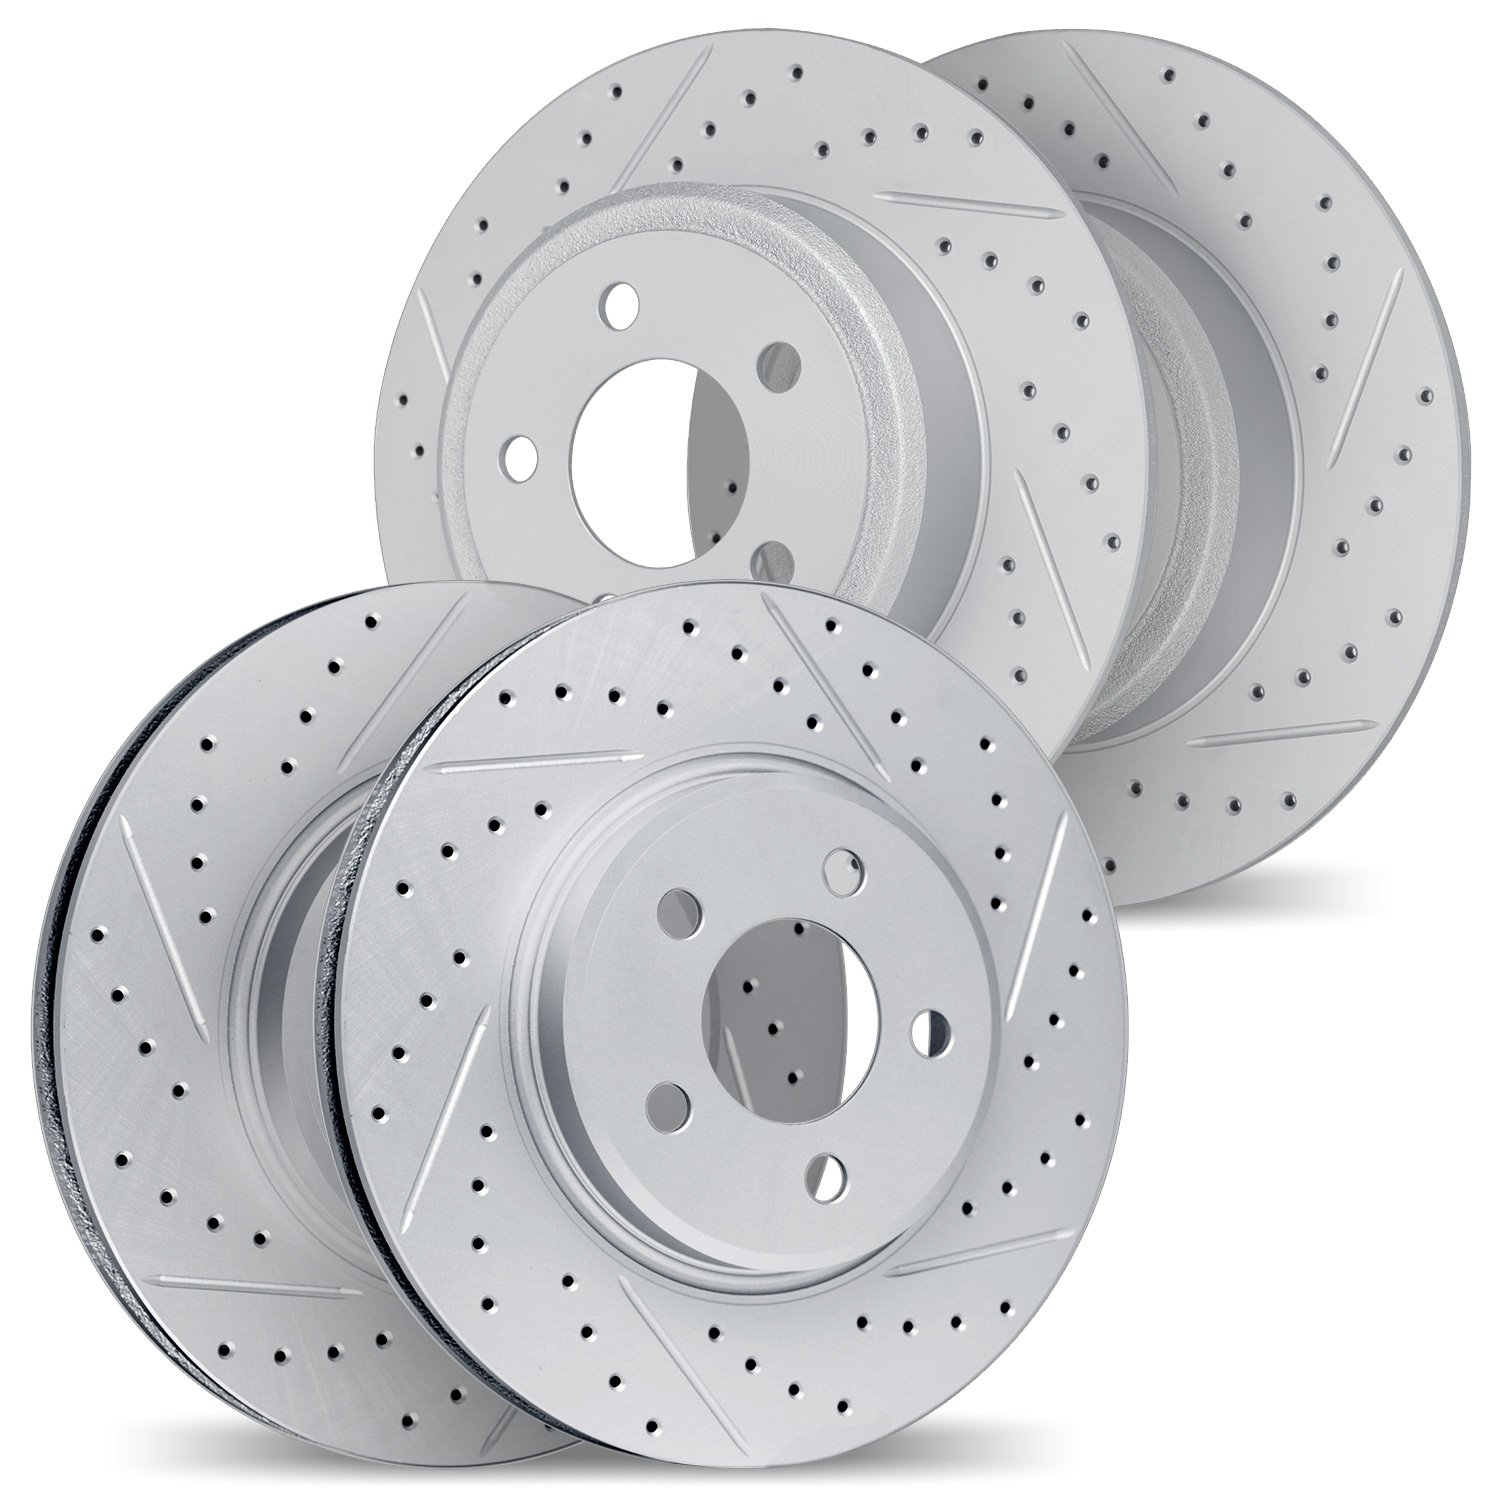 2004-47034 Geoperformance Drilled/Slotted Brake Rotors, 2007-2010 GM, Position: Front and Rear